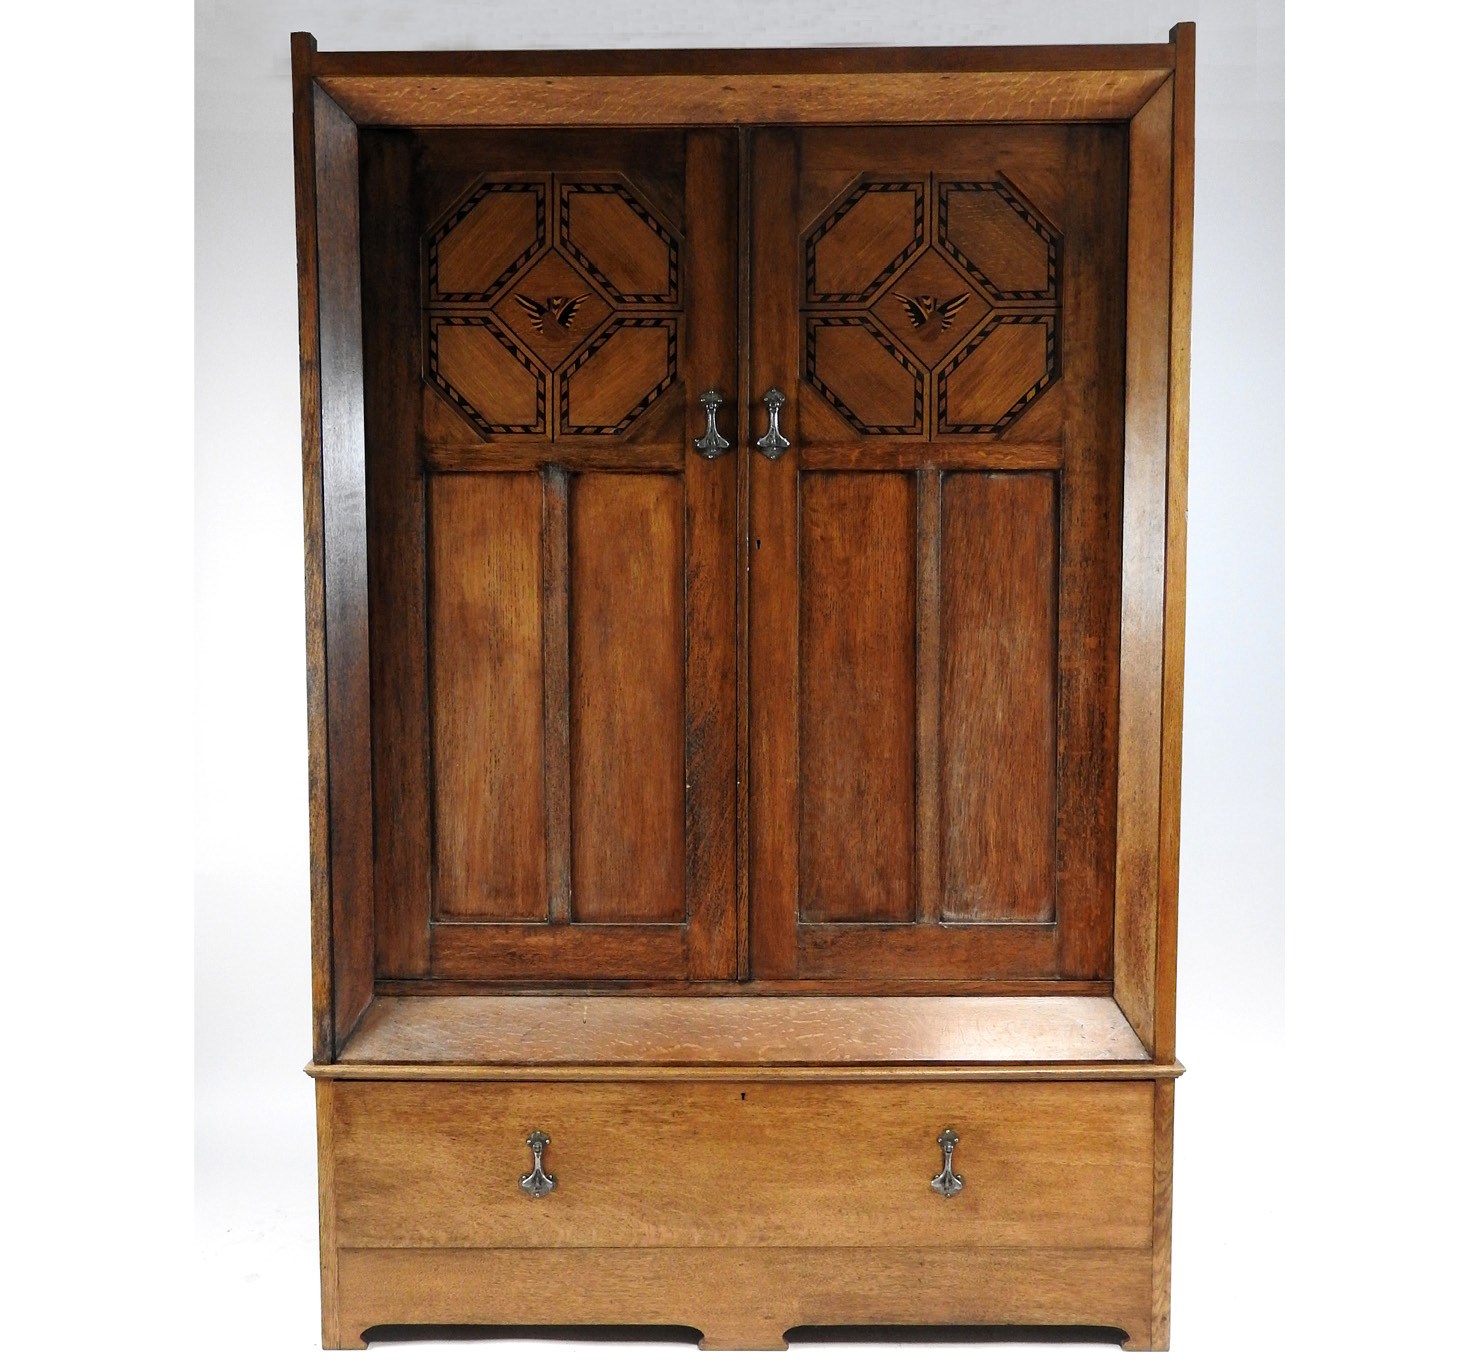 Lot 145, A late Victorian Scottish style oak and inlaid Arts and Crafts bedroom suite